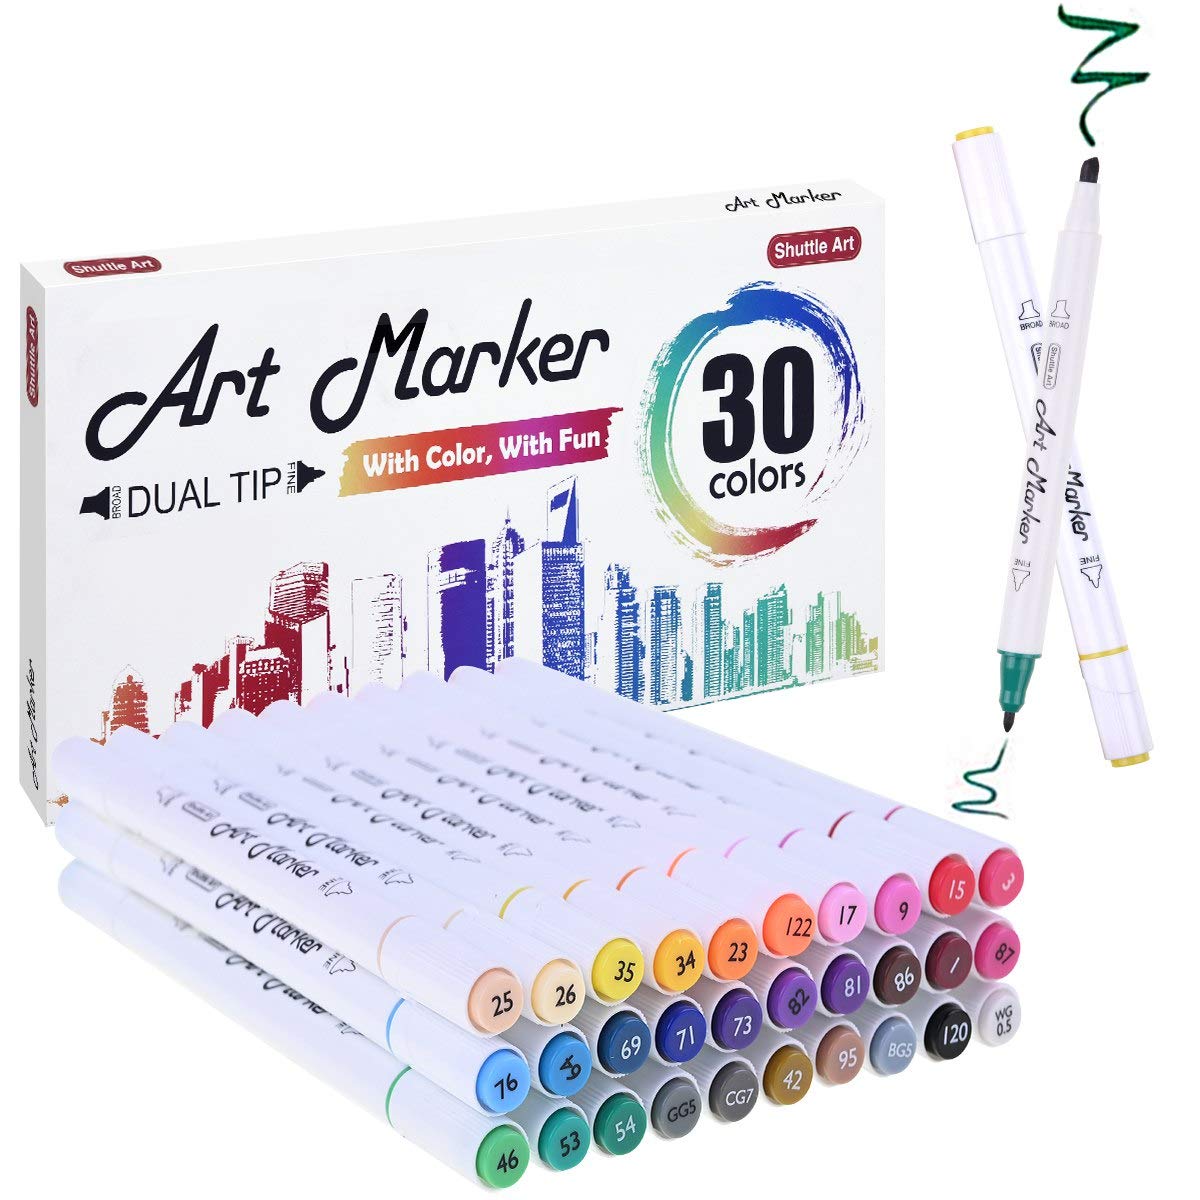 Soucolor Alcohol Markers, 131 Dual Tip Permanent Artist Art Markers for  Adult Coloring, Sketching and Illustrations, with Case for Easy Storage